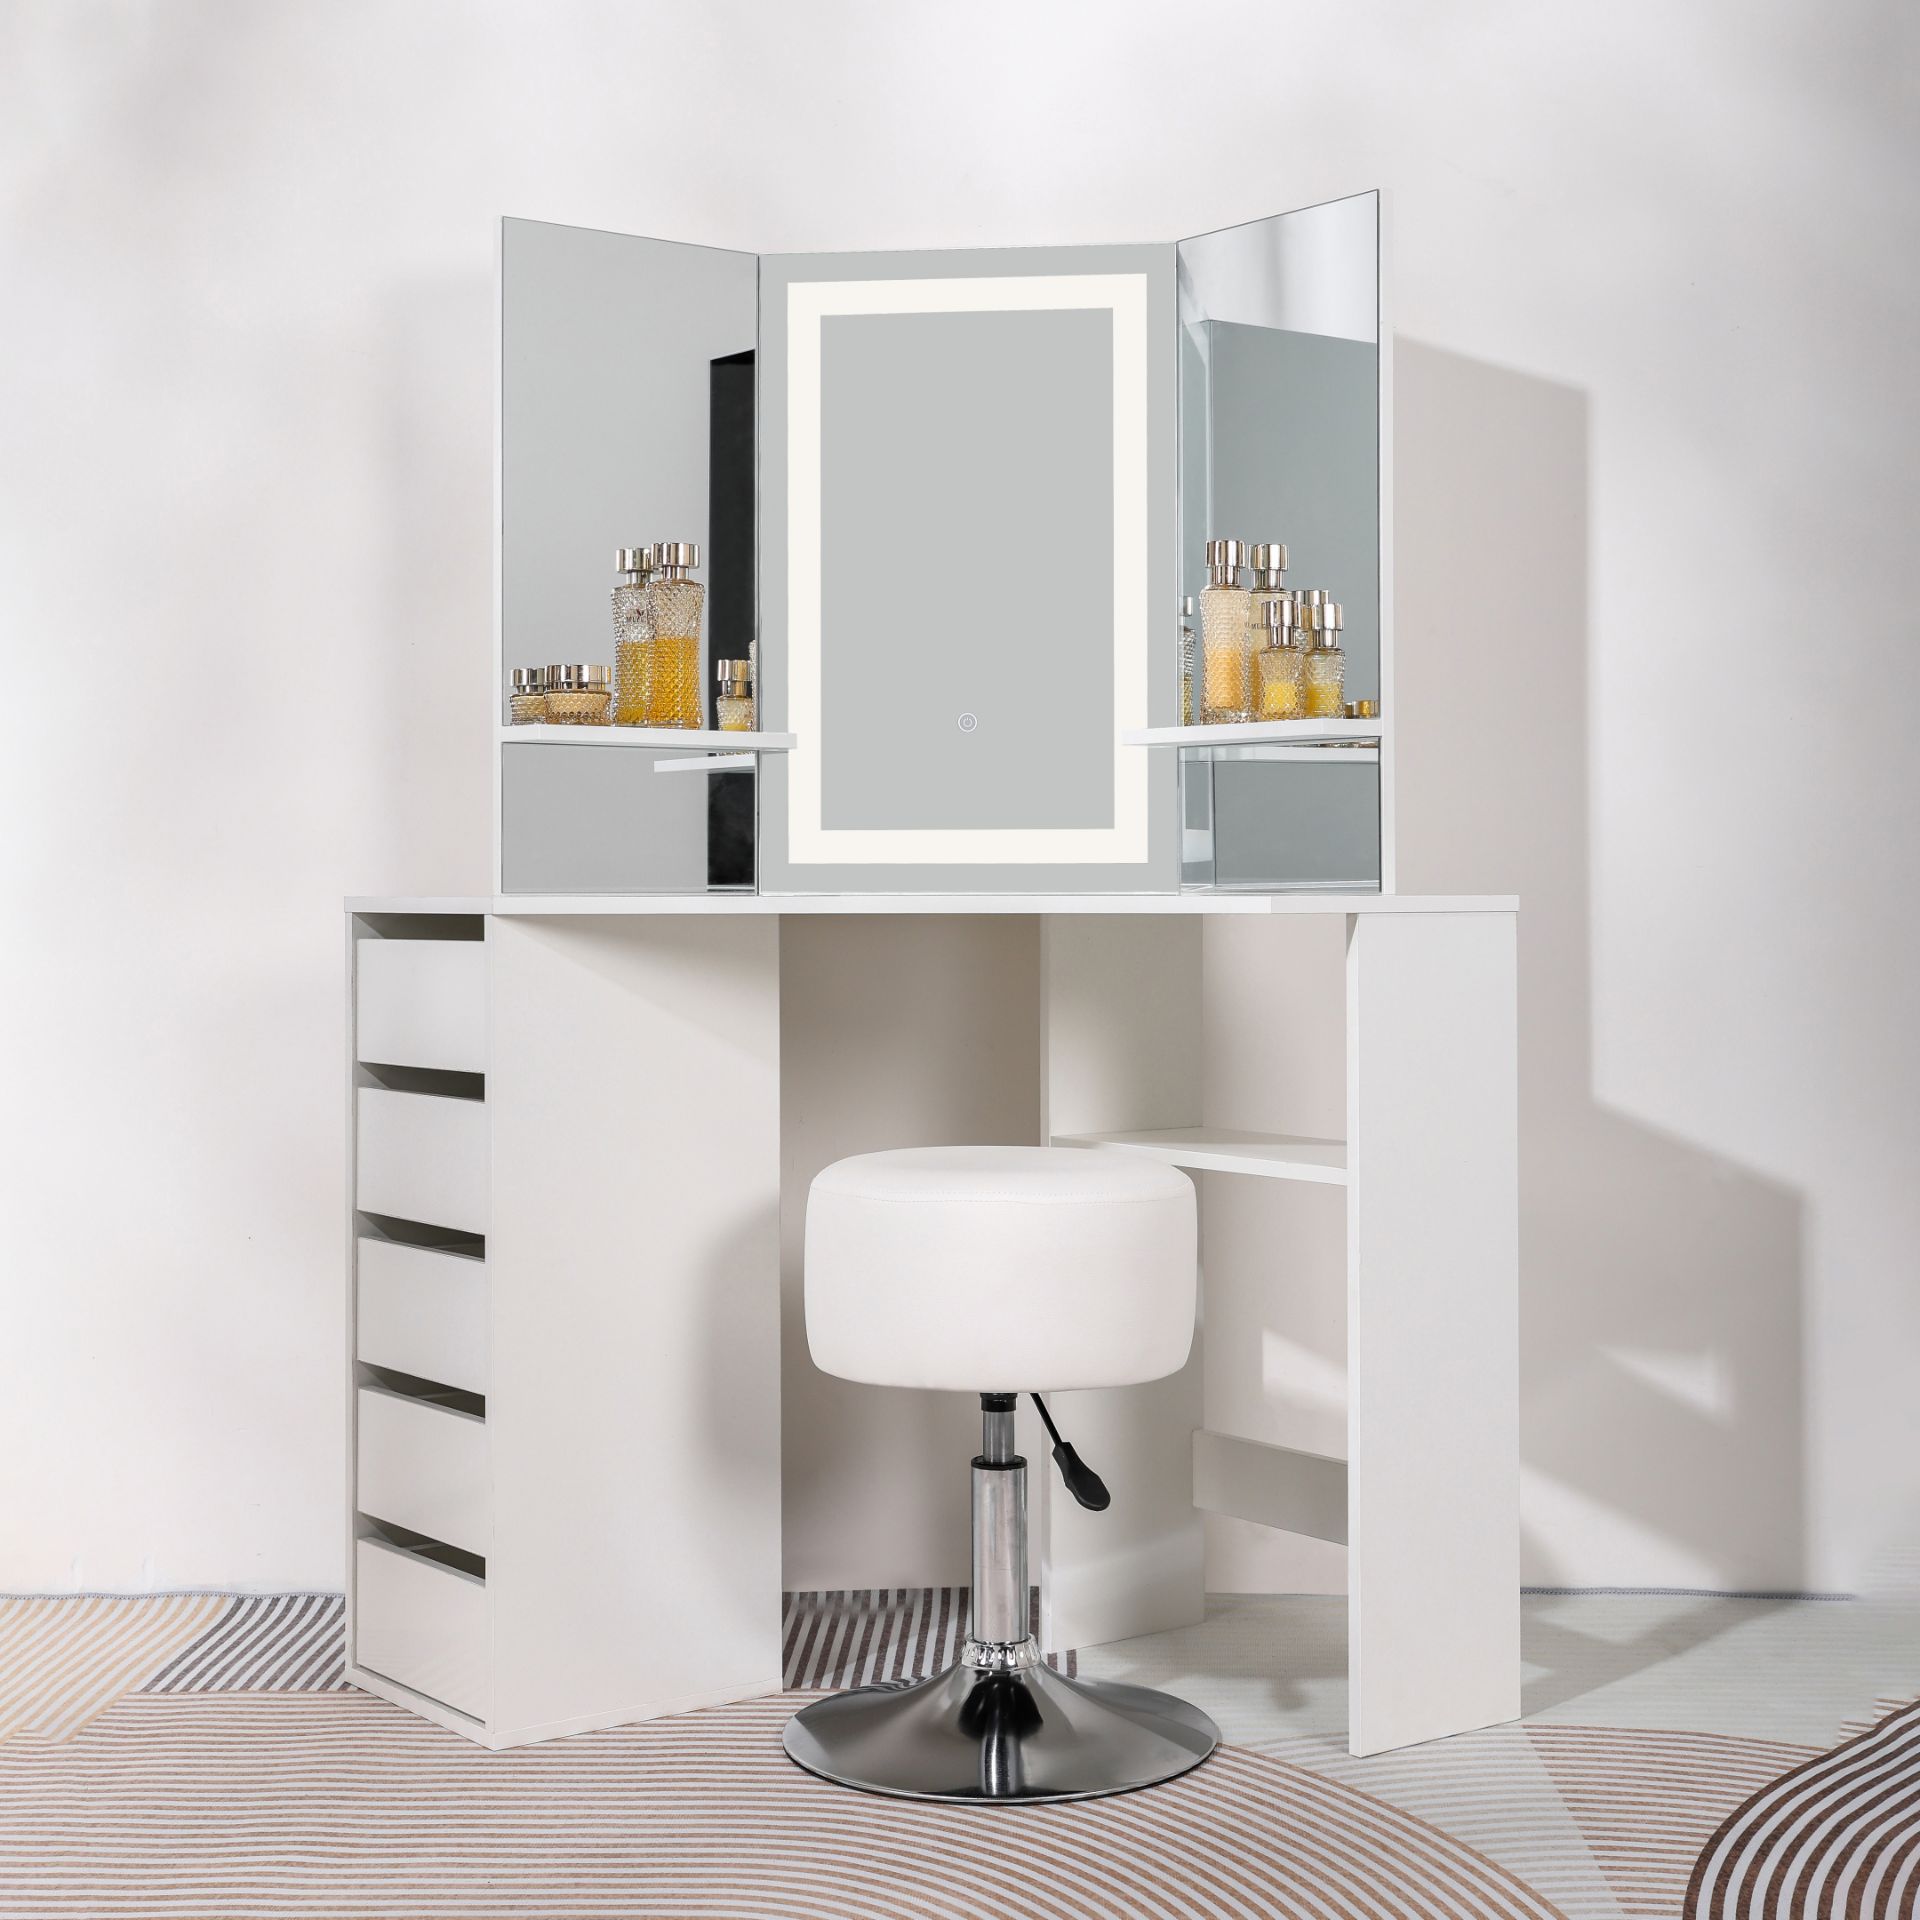 BRAND NEW MAKE UP CORNER DRESSING TABLE 5 DRAWER WITH TOUCH LED MIRROR & STOOL RRP £350 - Image 2 of 4